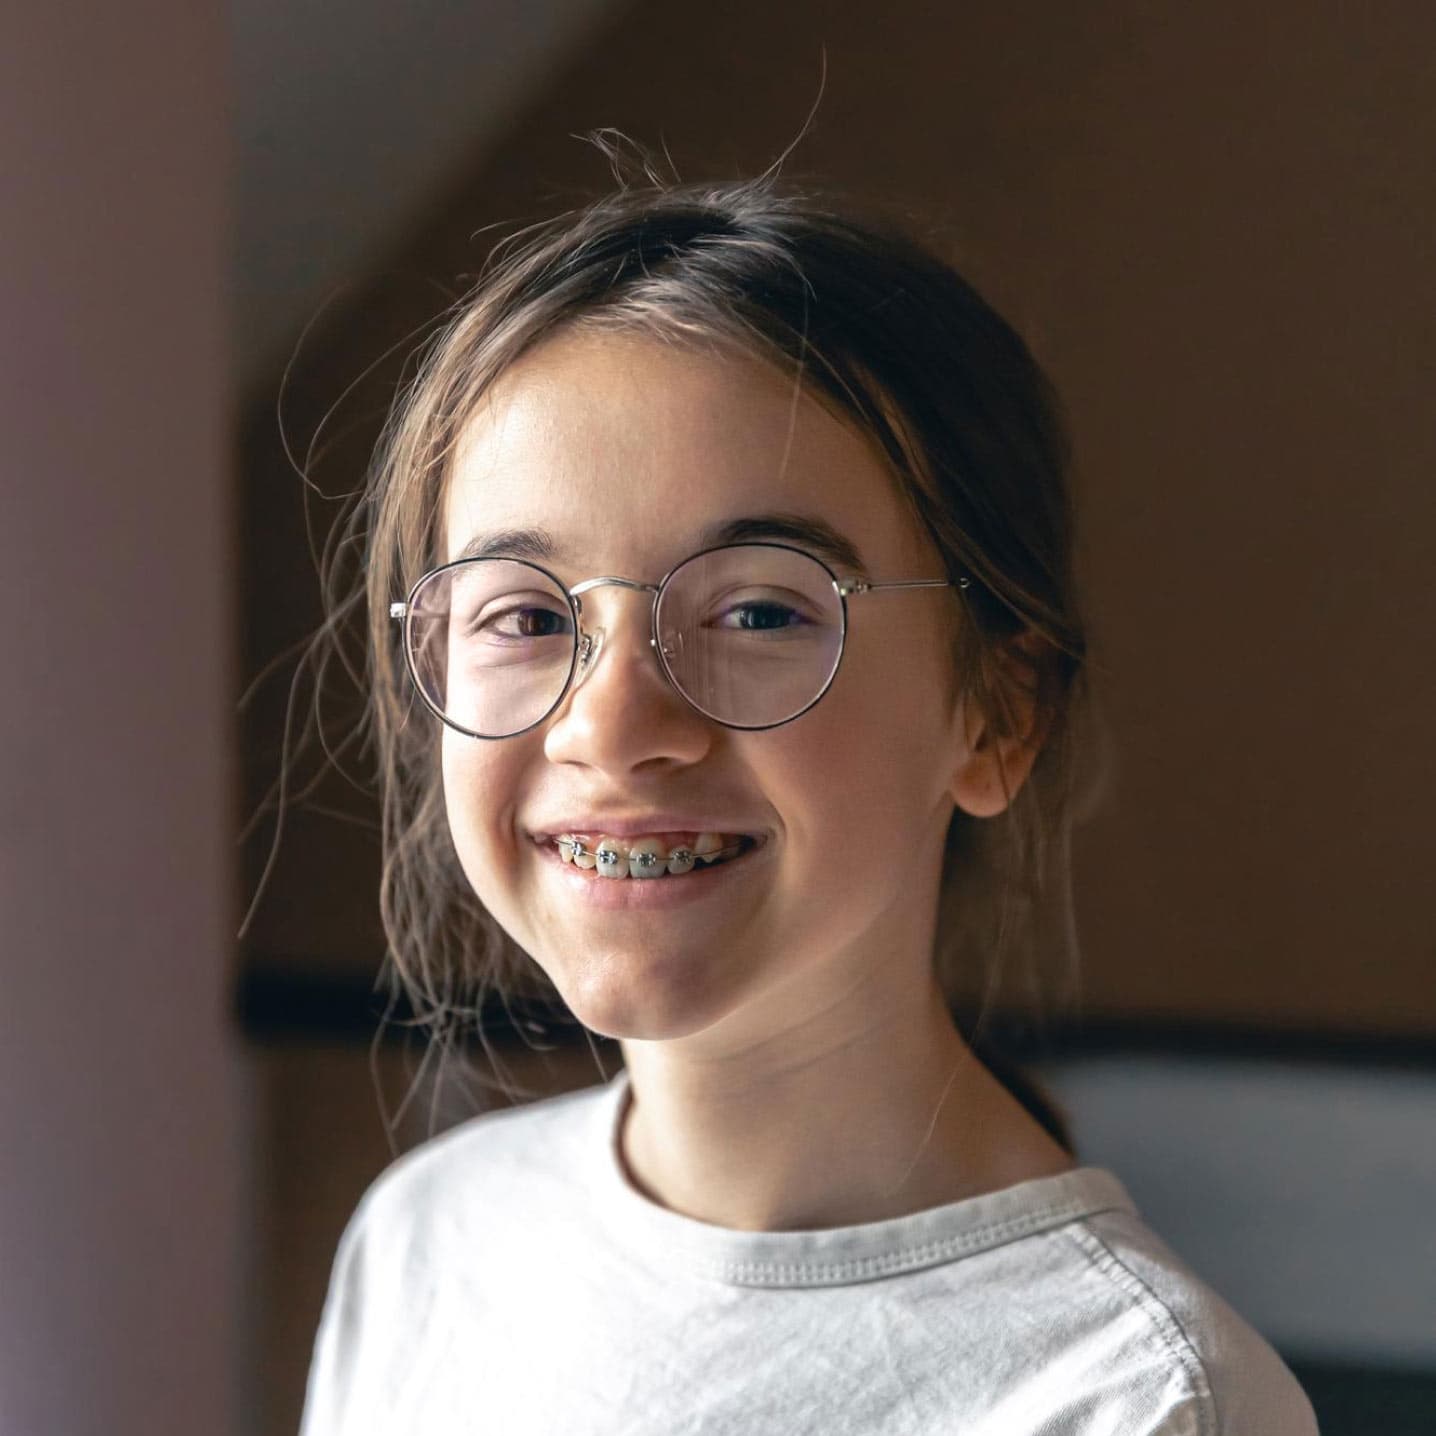 Girl with glasses and braces